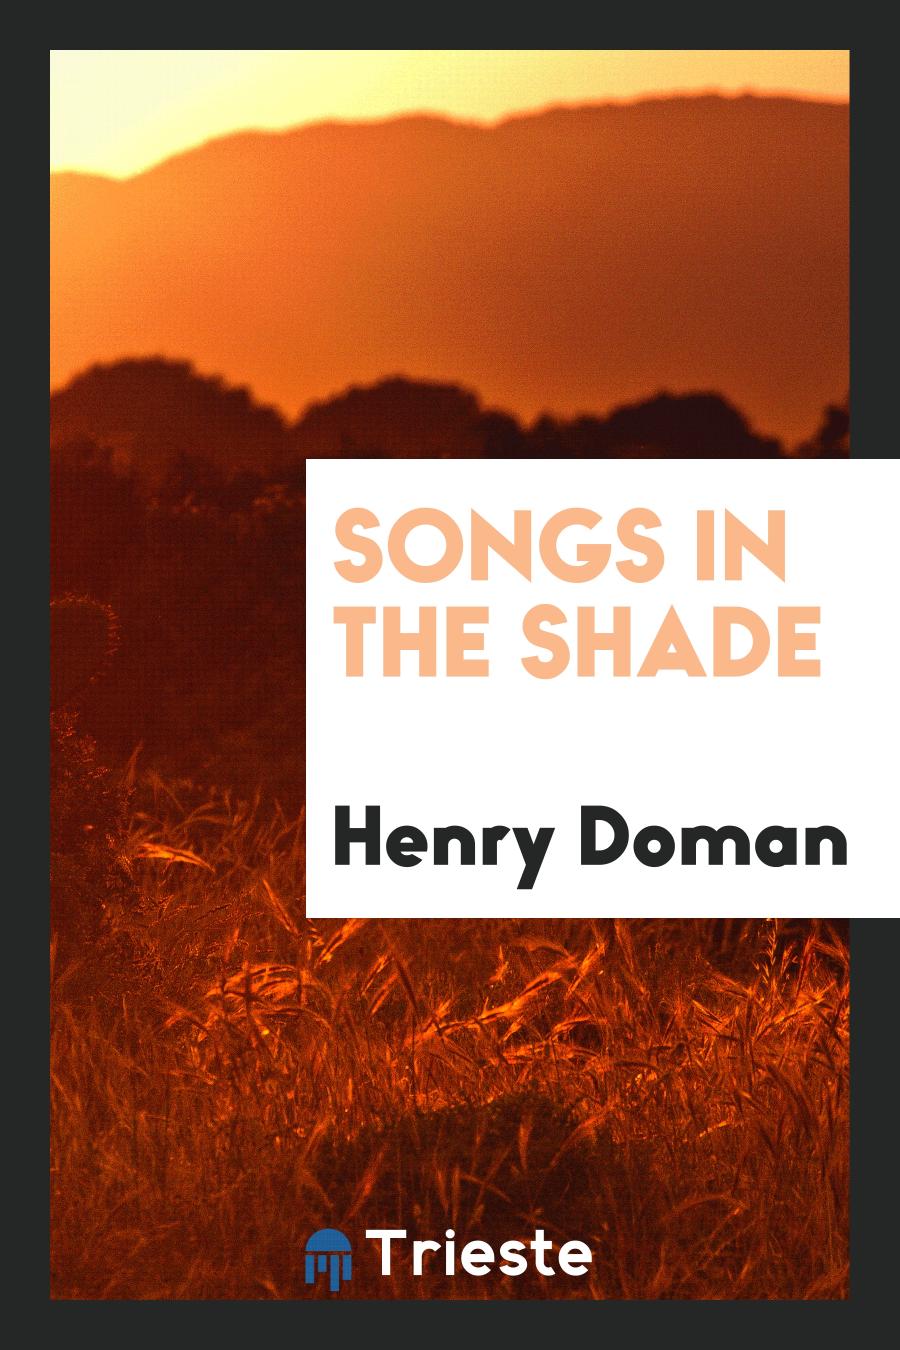 Songs in the Shade